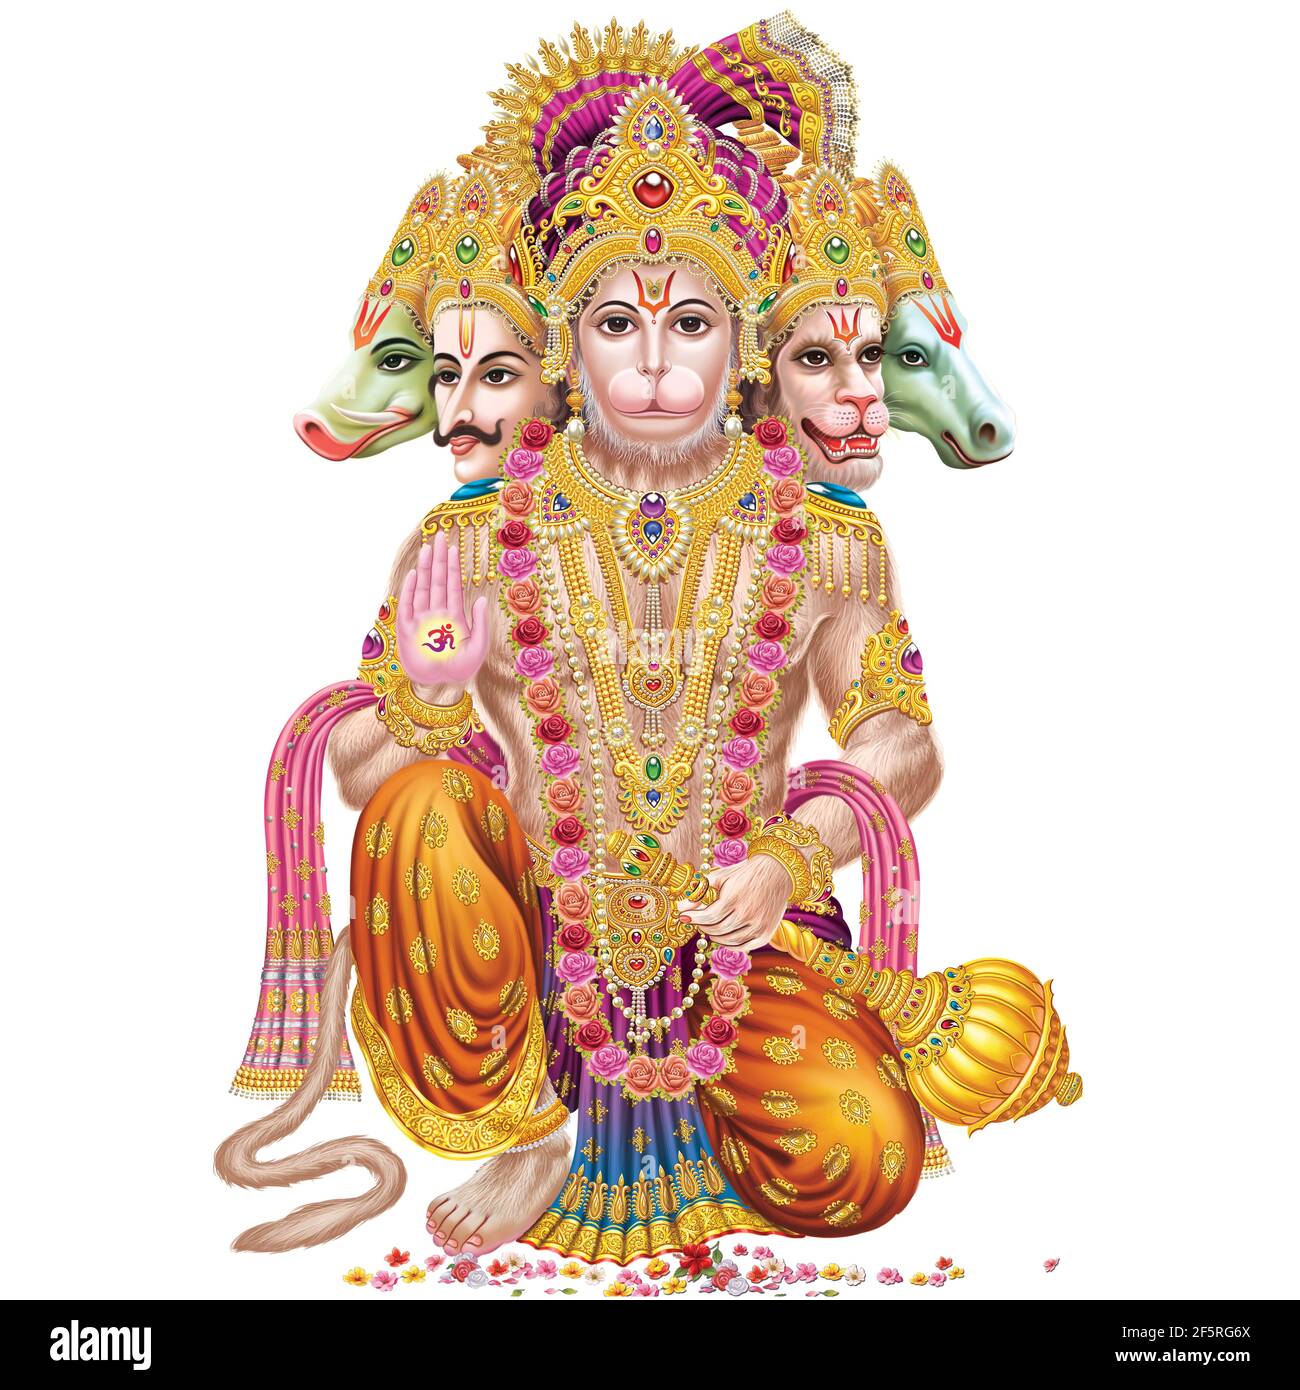 Browse high resolution stock images of Lord Hanuman Stock Photo